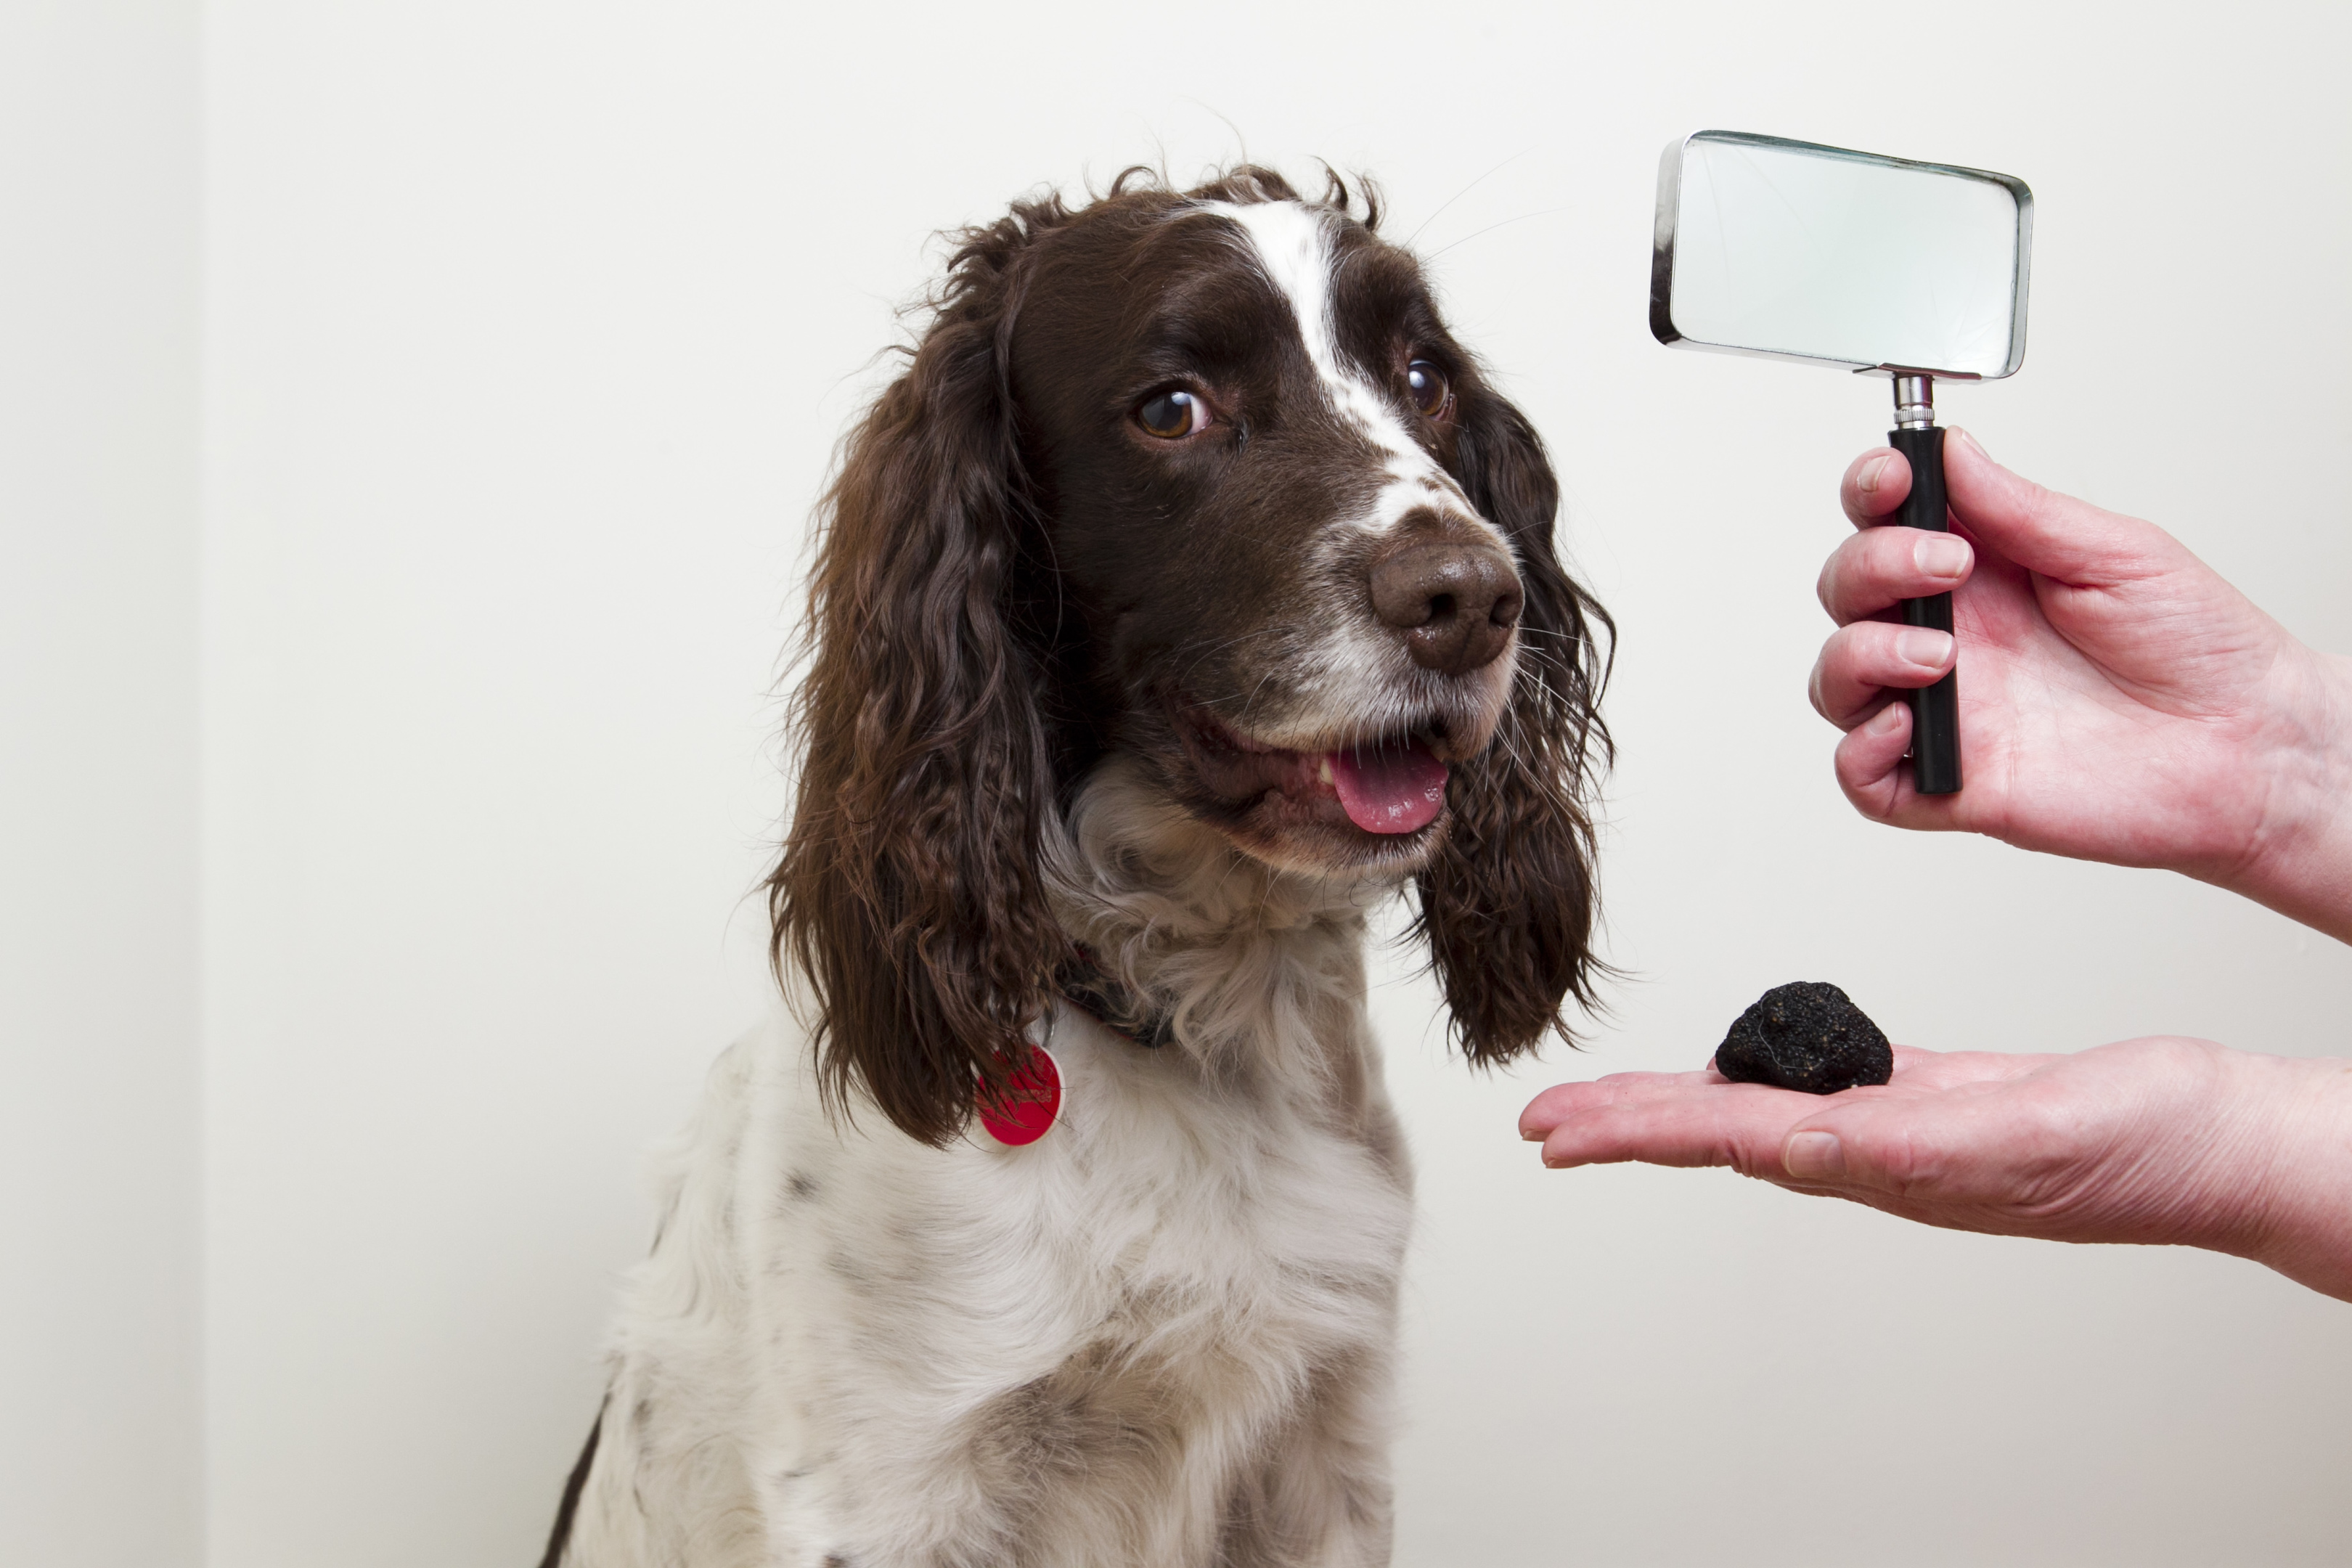 Max the truffle sniffing dog (Andrew Cawley / DC Thomson)